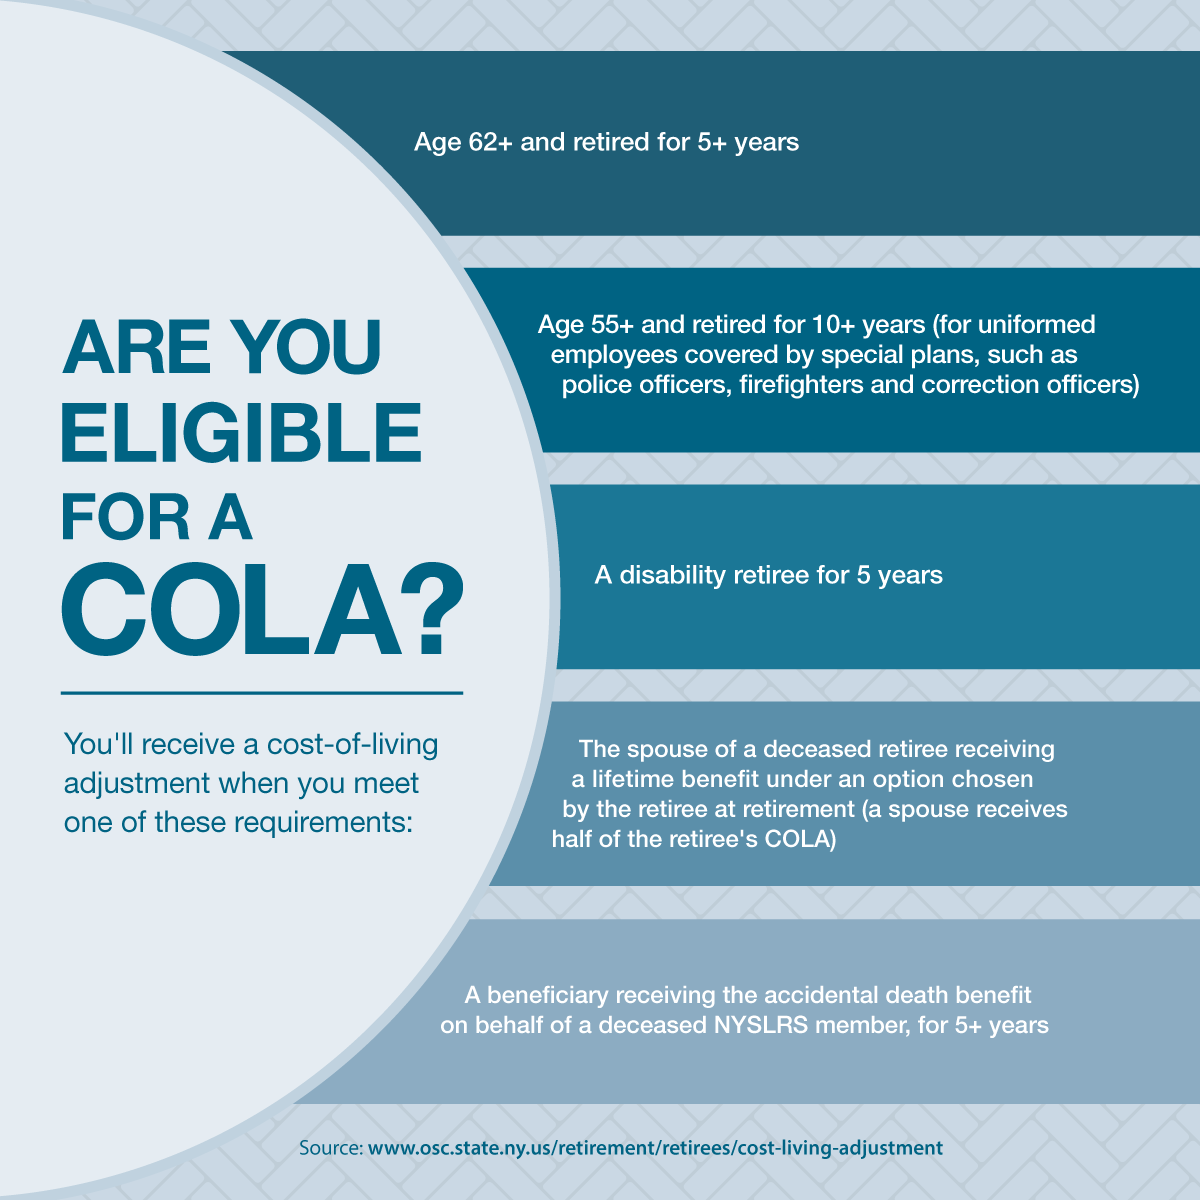 eligibility for cost-of-living adjustment (COLA)